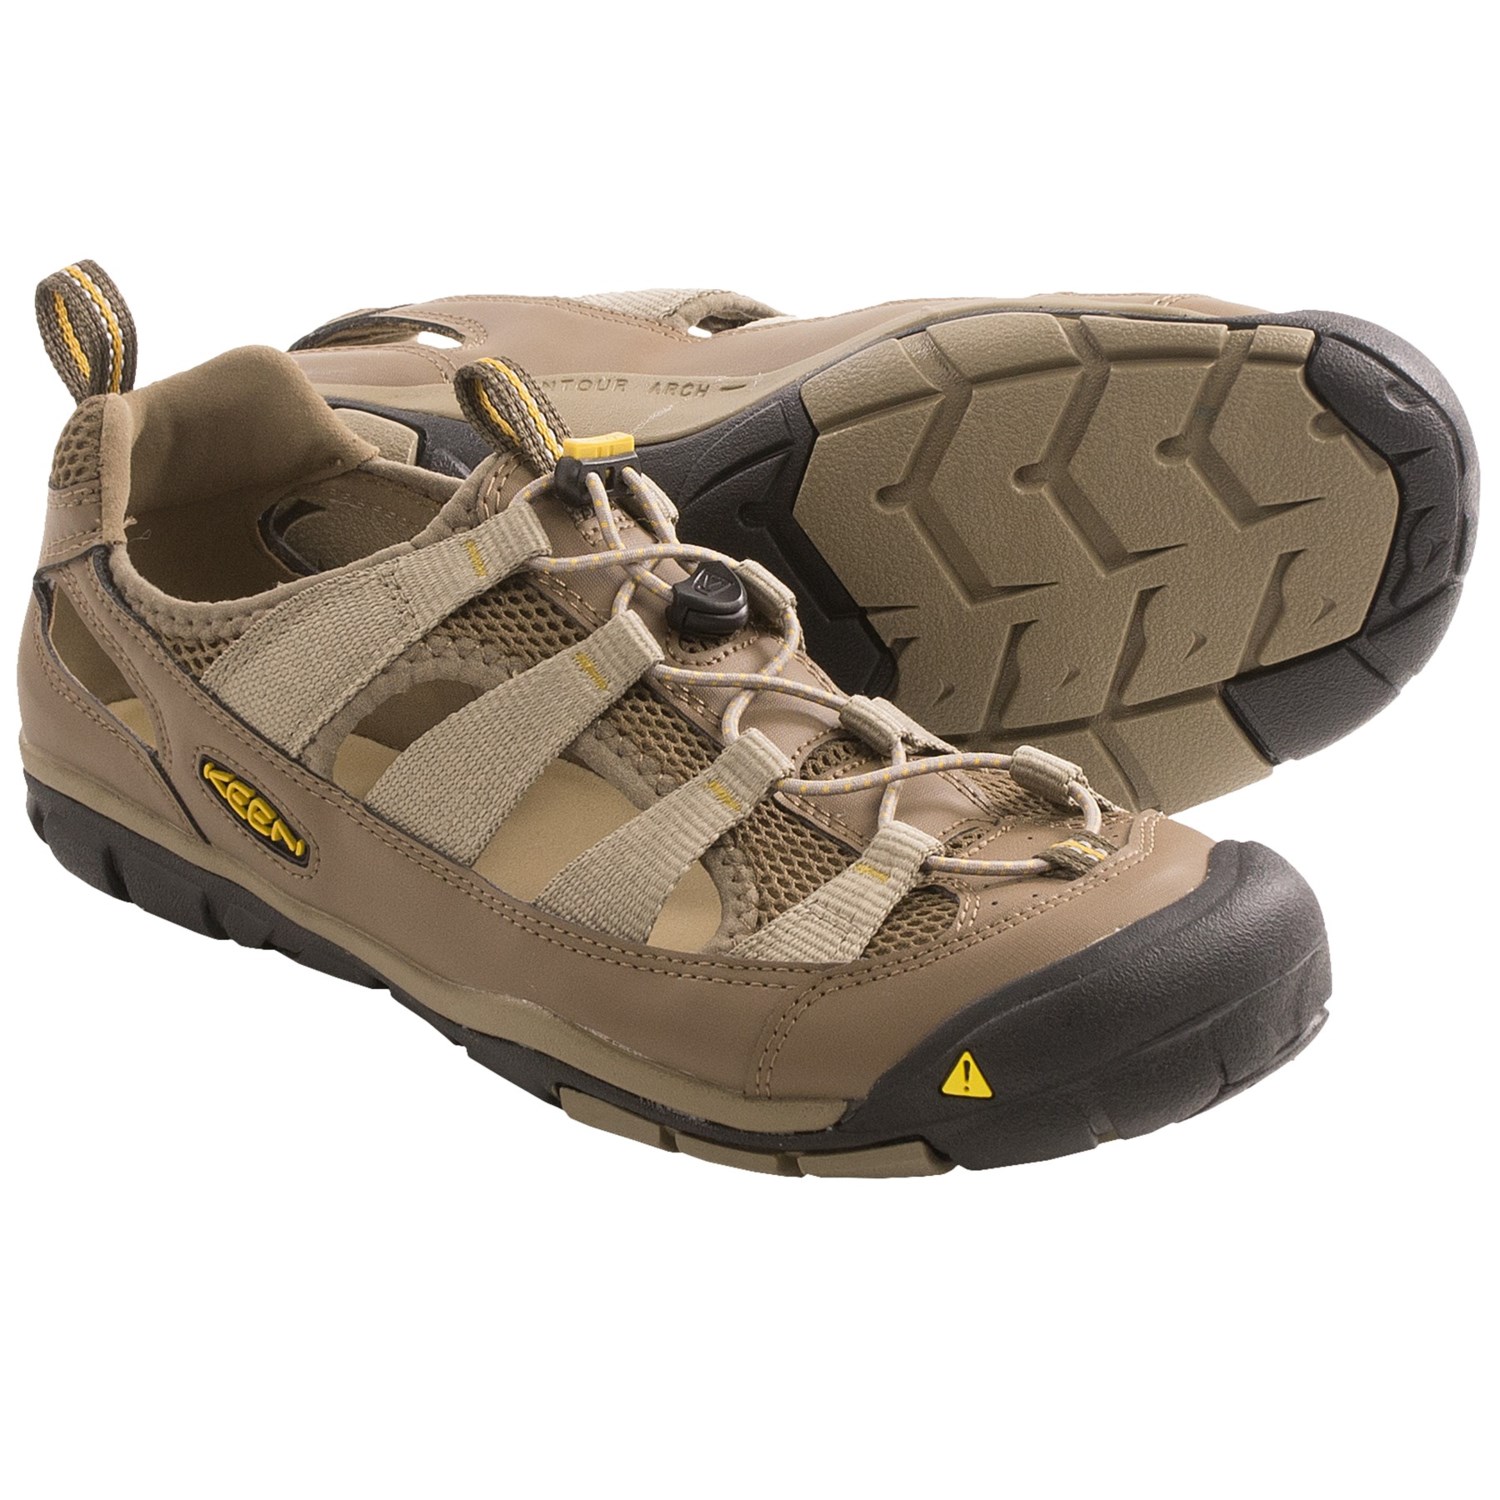 Keen Gallatin CNX Sandals (For Men) in ShitakeTawny Olive